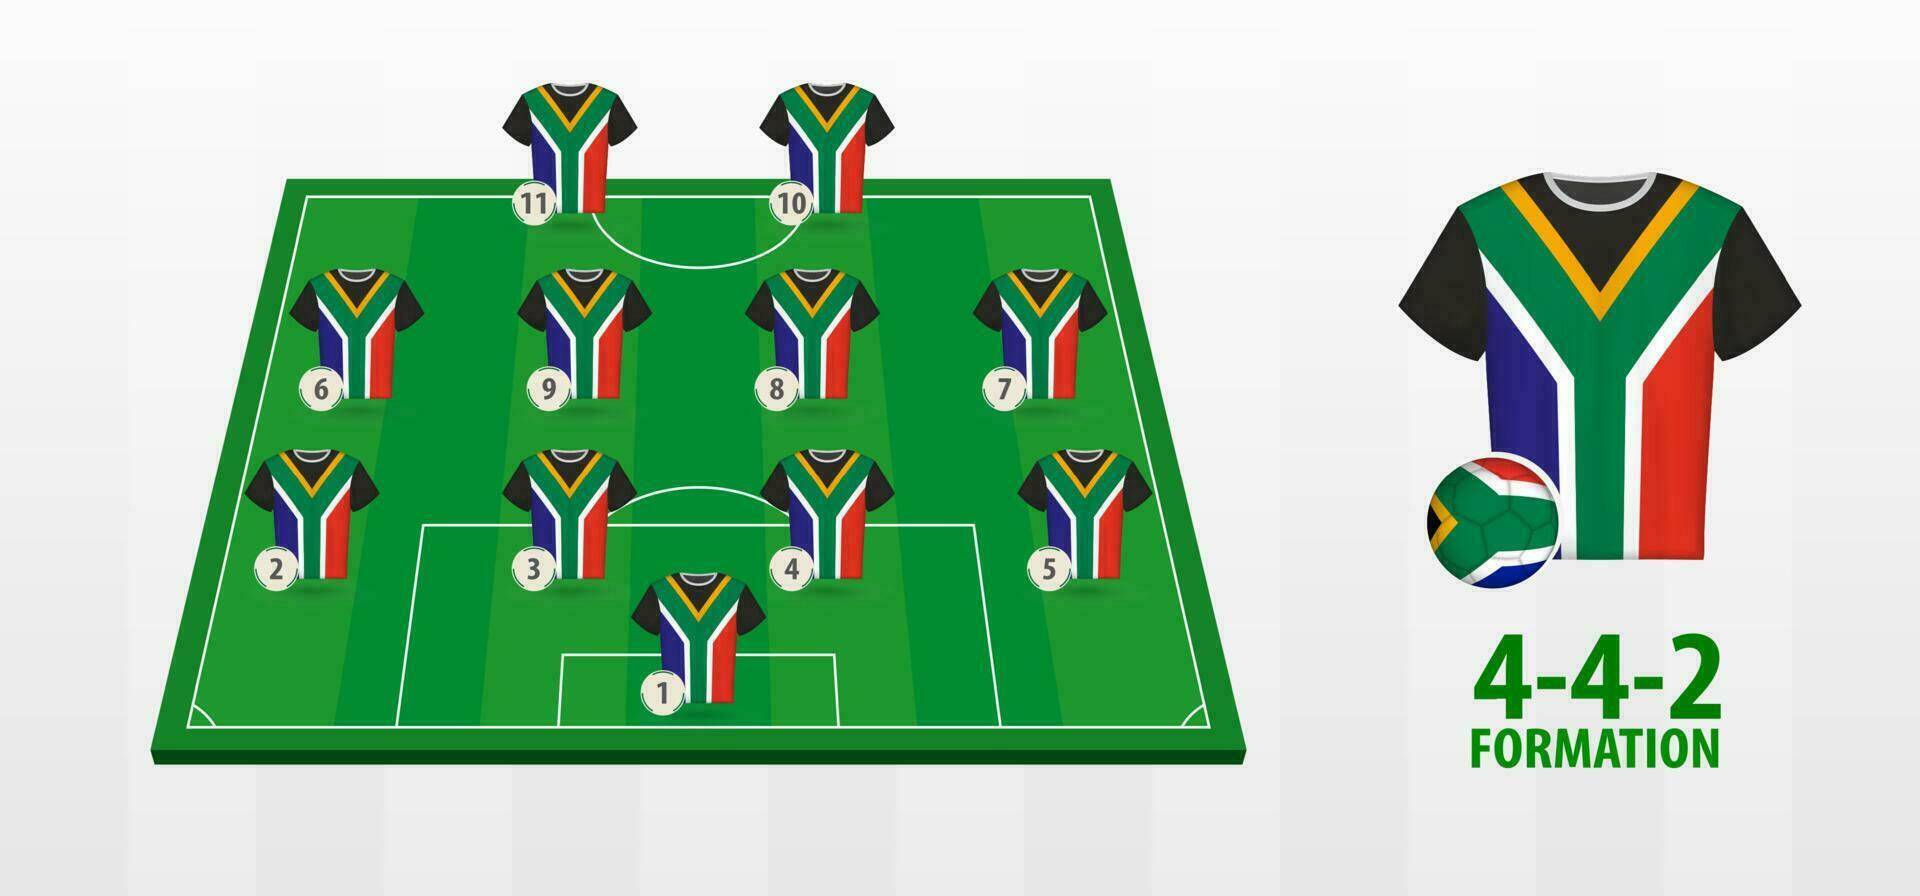 South Africa National Football Team Formation on Football Field. vector